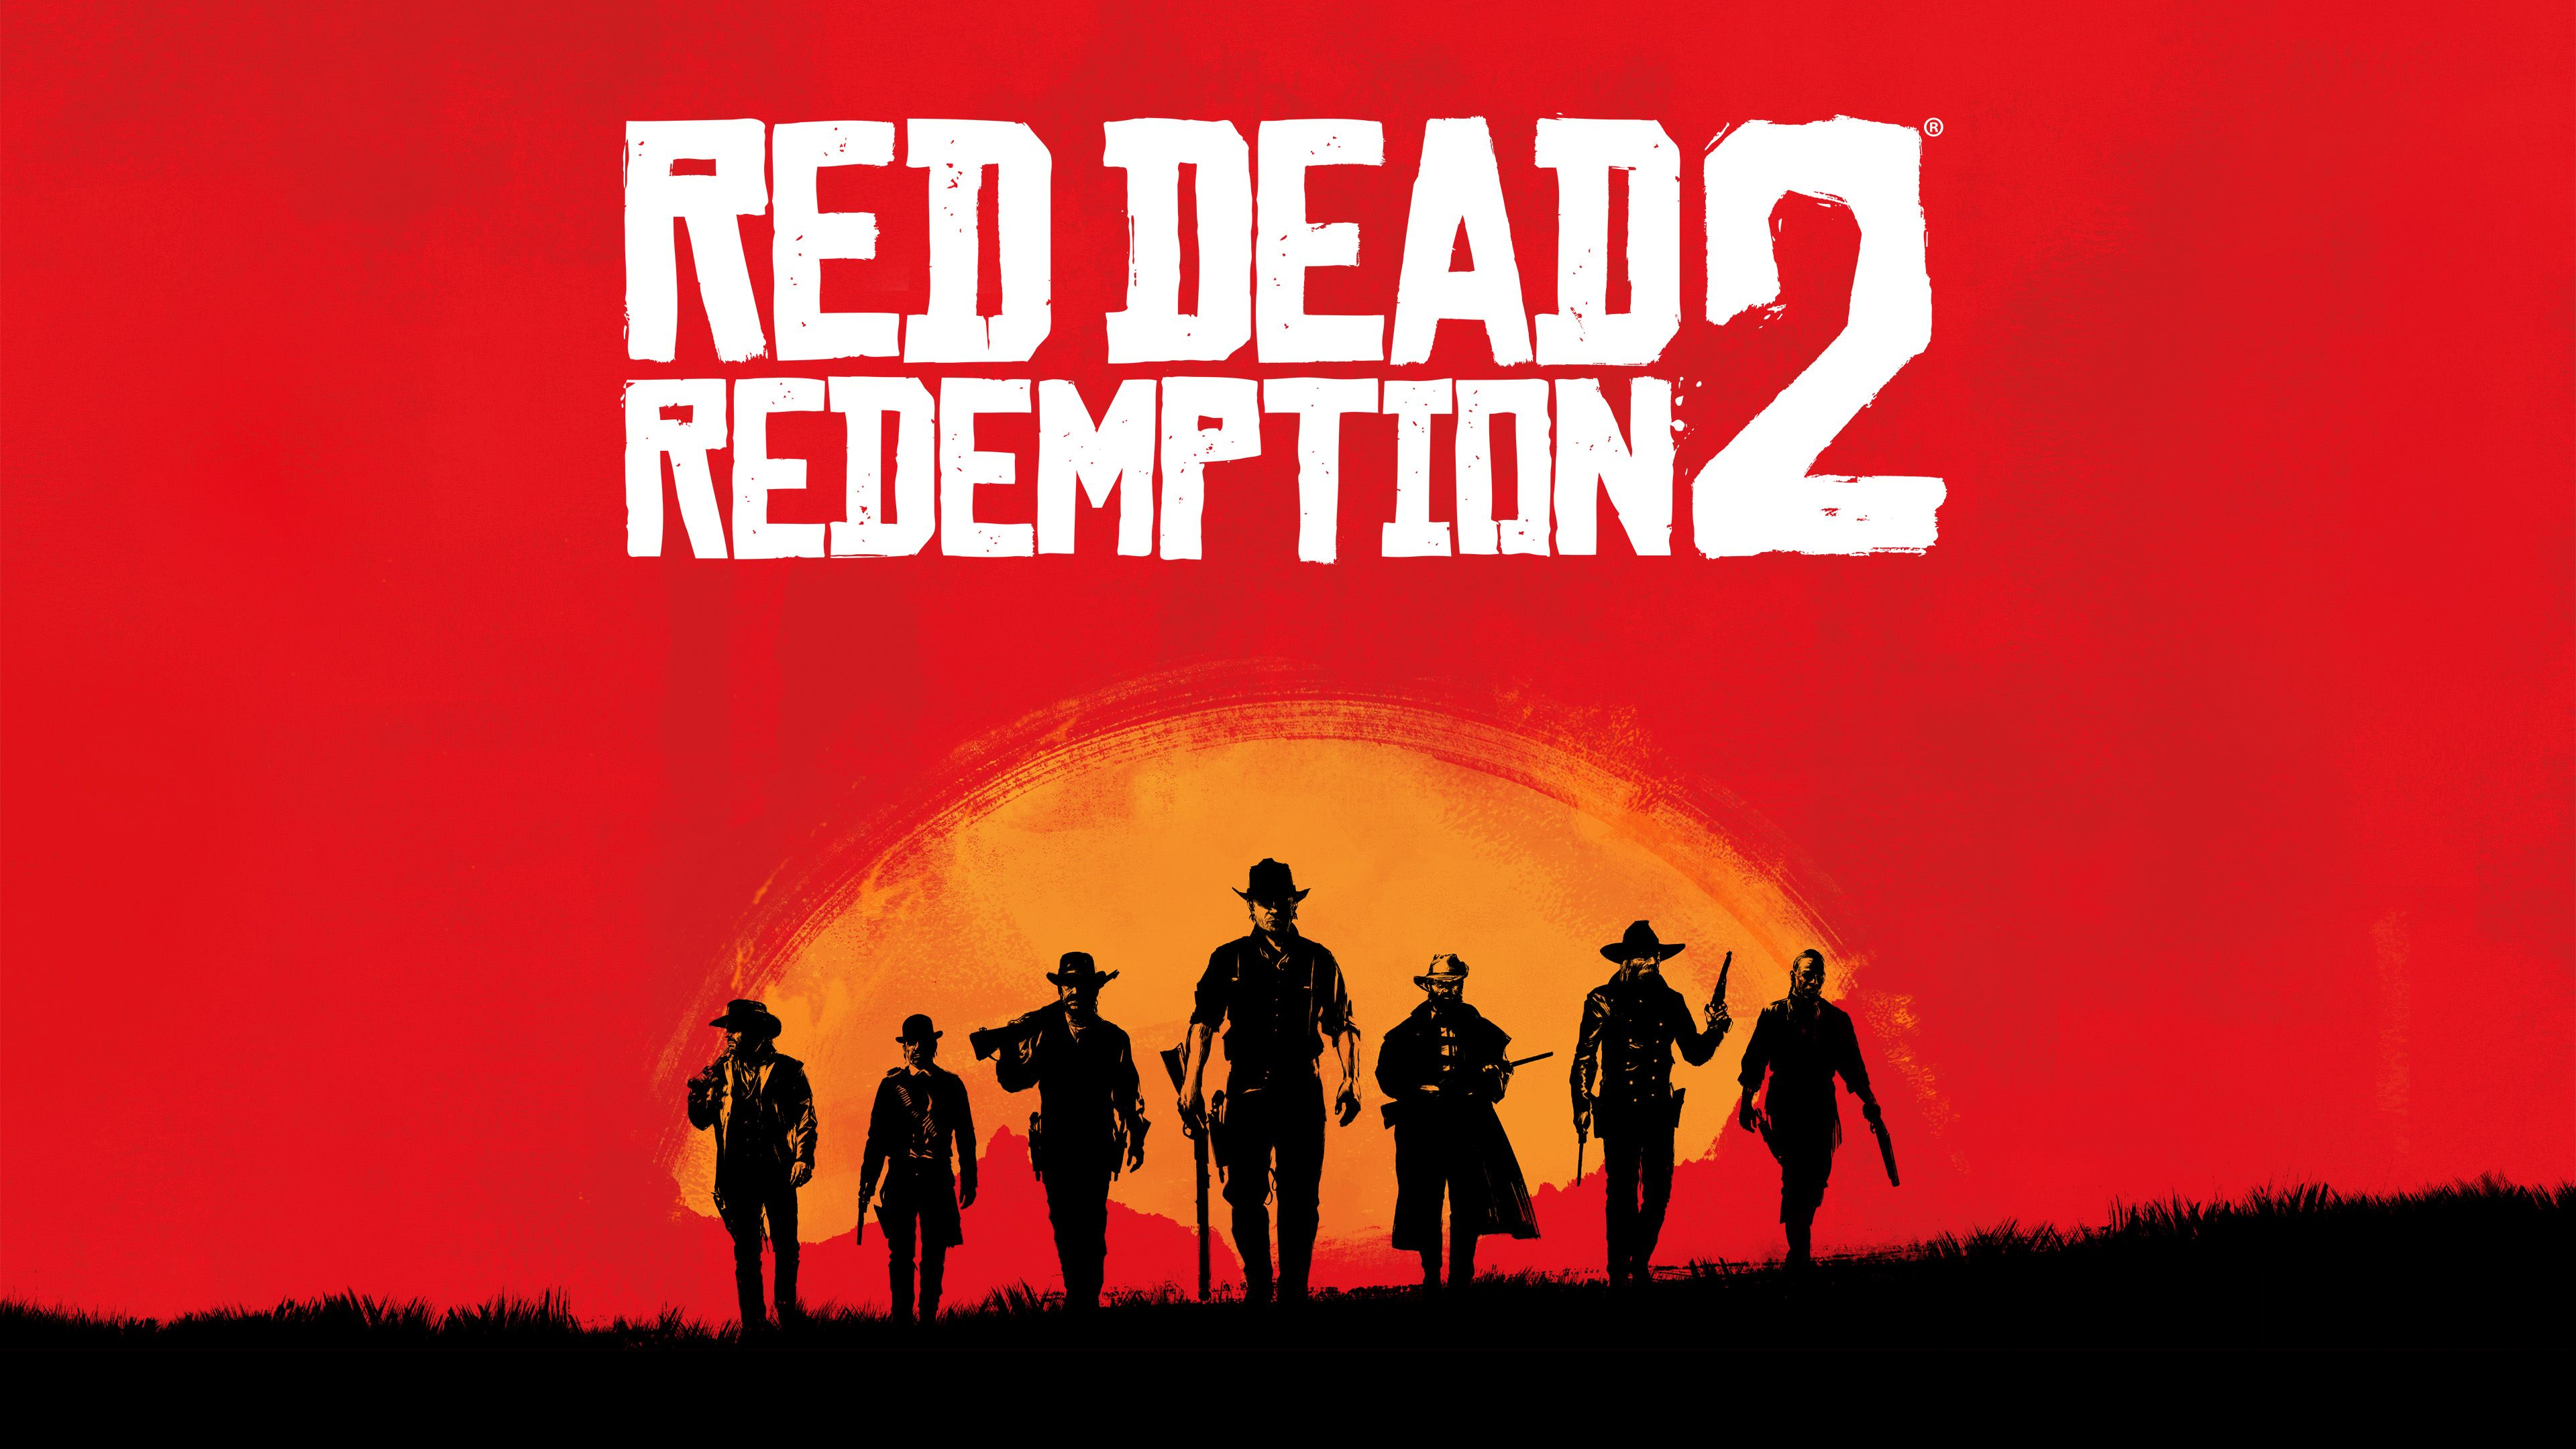 3840x2160 Red Dead Redemption 2 Wallpapers Top Free Red Dead Redemption 2 Backgrounds